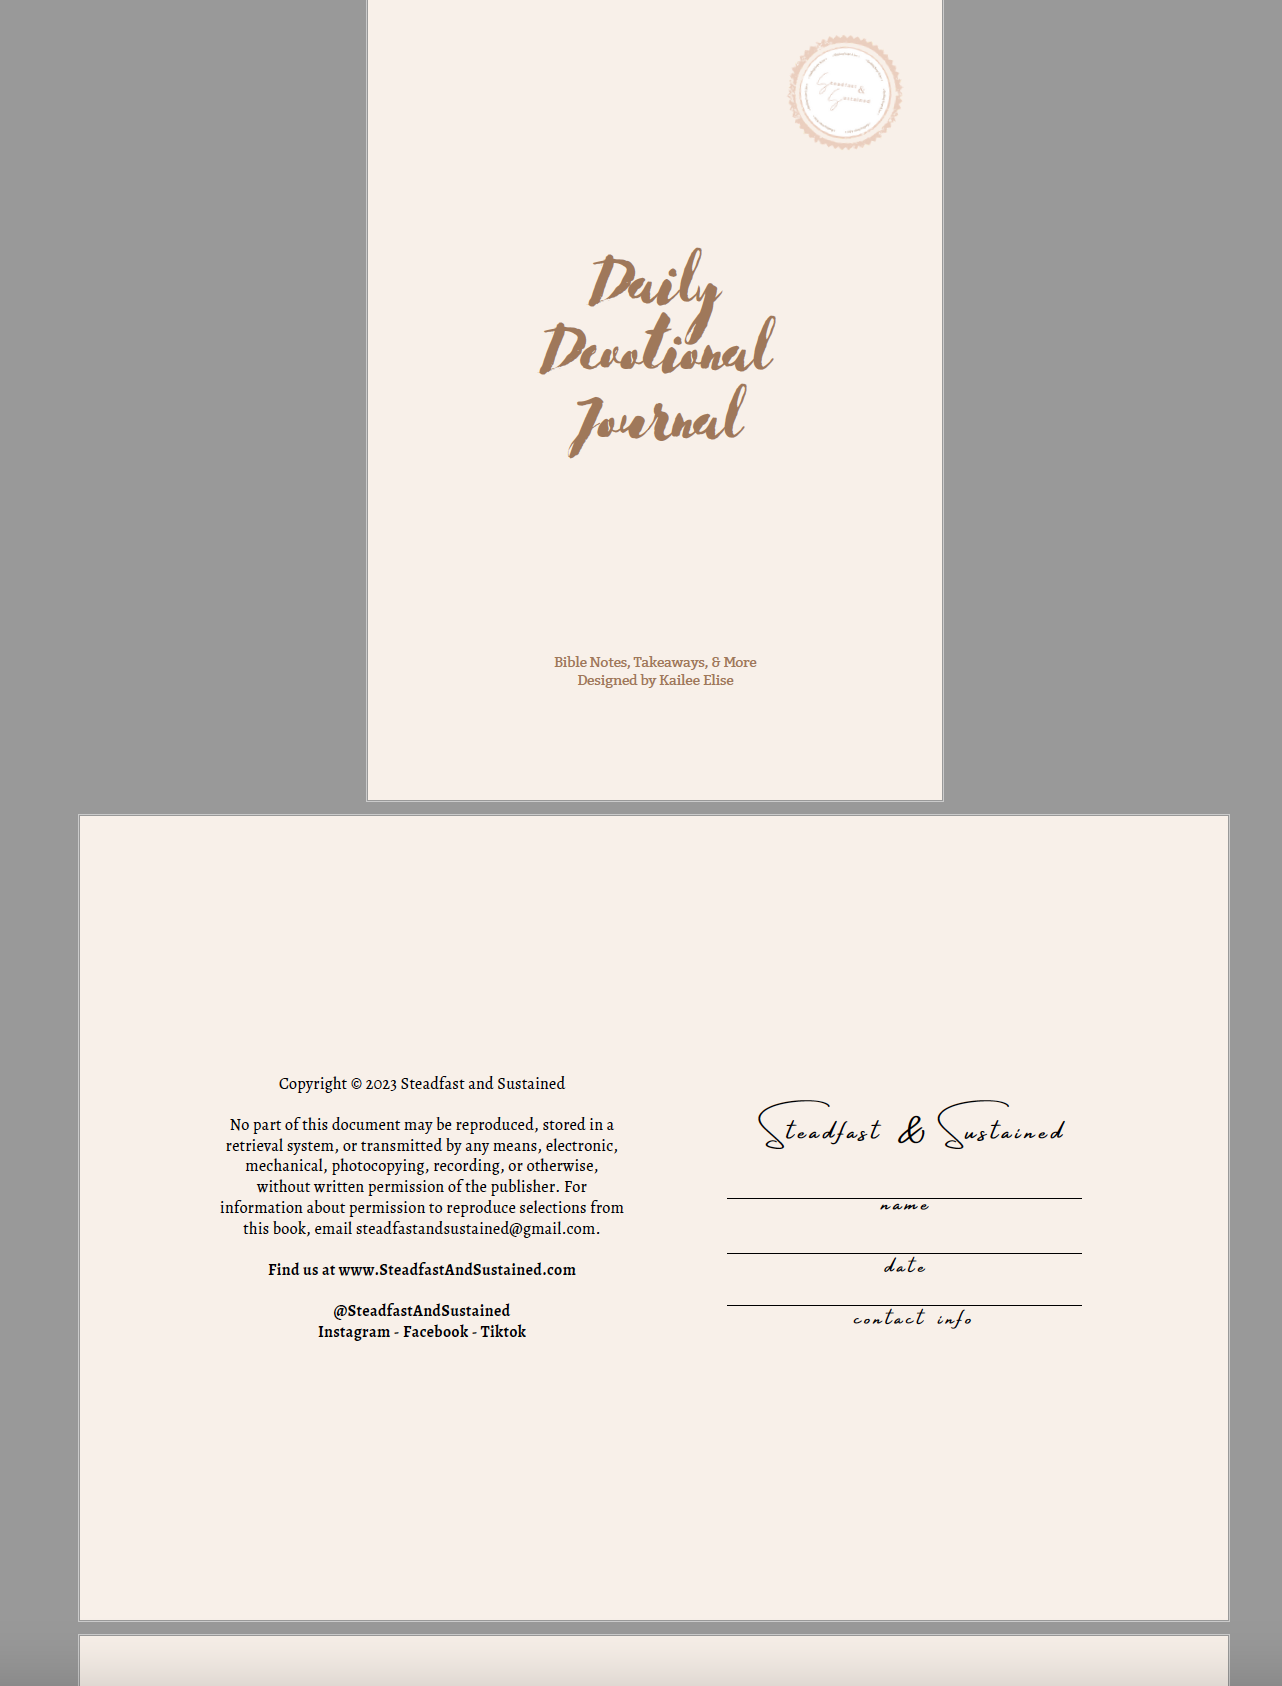 Bible Notes Journal: Digital Version - PDF Bundle - Steadfast and Sustained